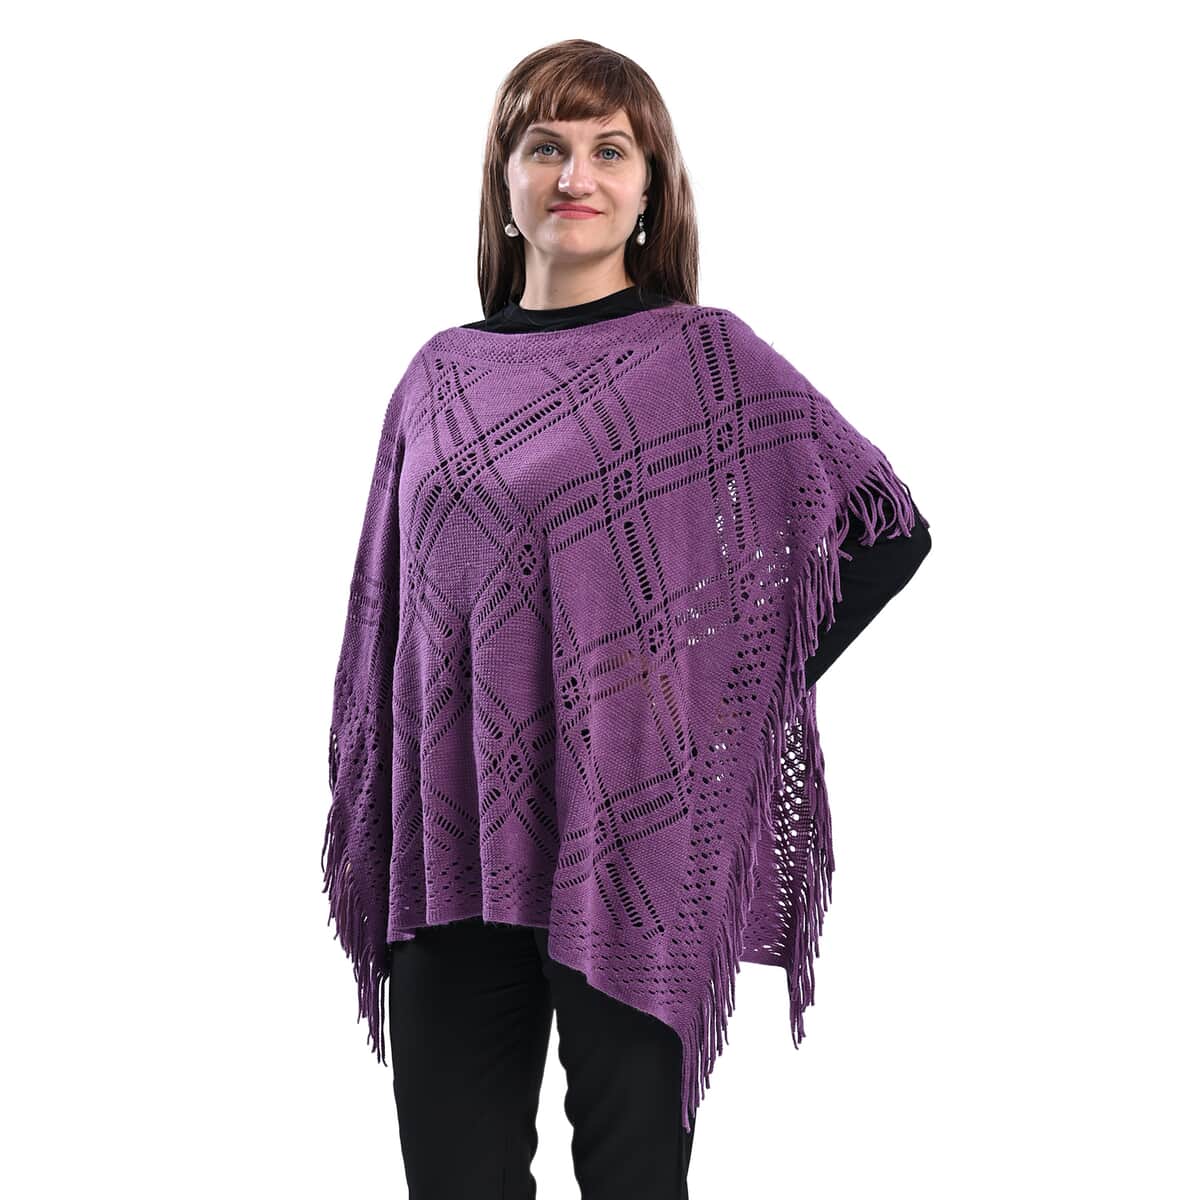 Passage Knitted Purple Poncho with Tassels (One Size Fits Most) image number 0